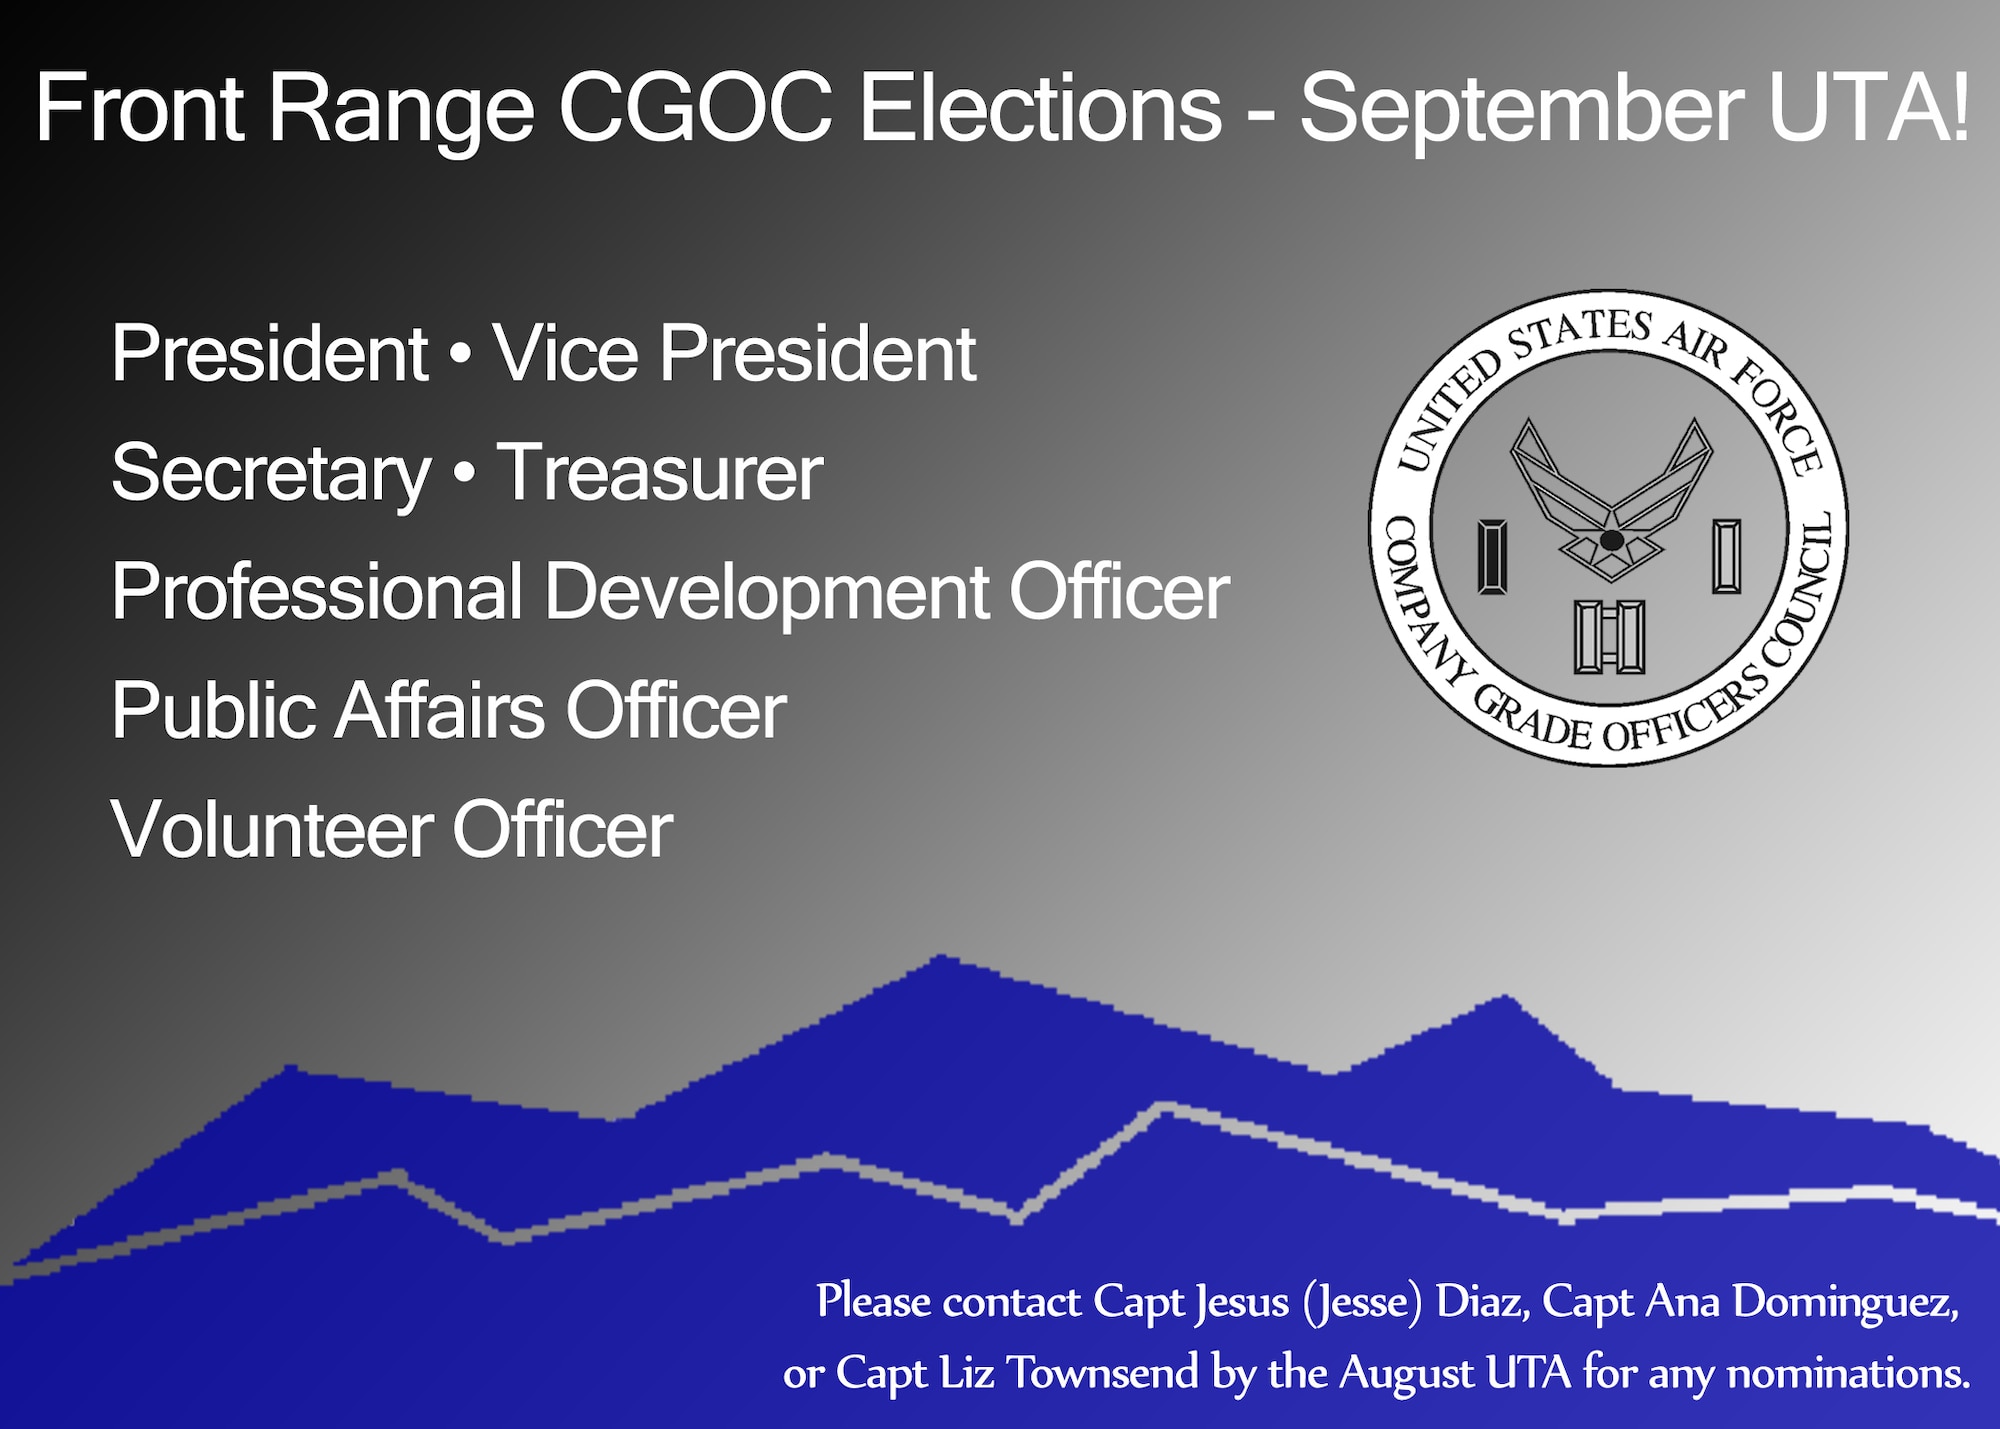 SCHRIEVER AIR FORCE BASE, Colo. -- The Front Range Company Grade Officers' council will be holding elections to fill leadership positions during the September Unit Training Assembly. (U.S. Air Force graphic/Senior Airman Laura Turner)